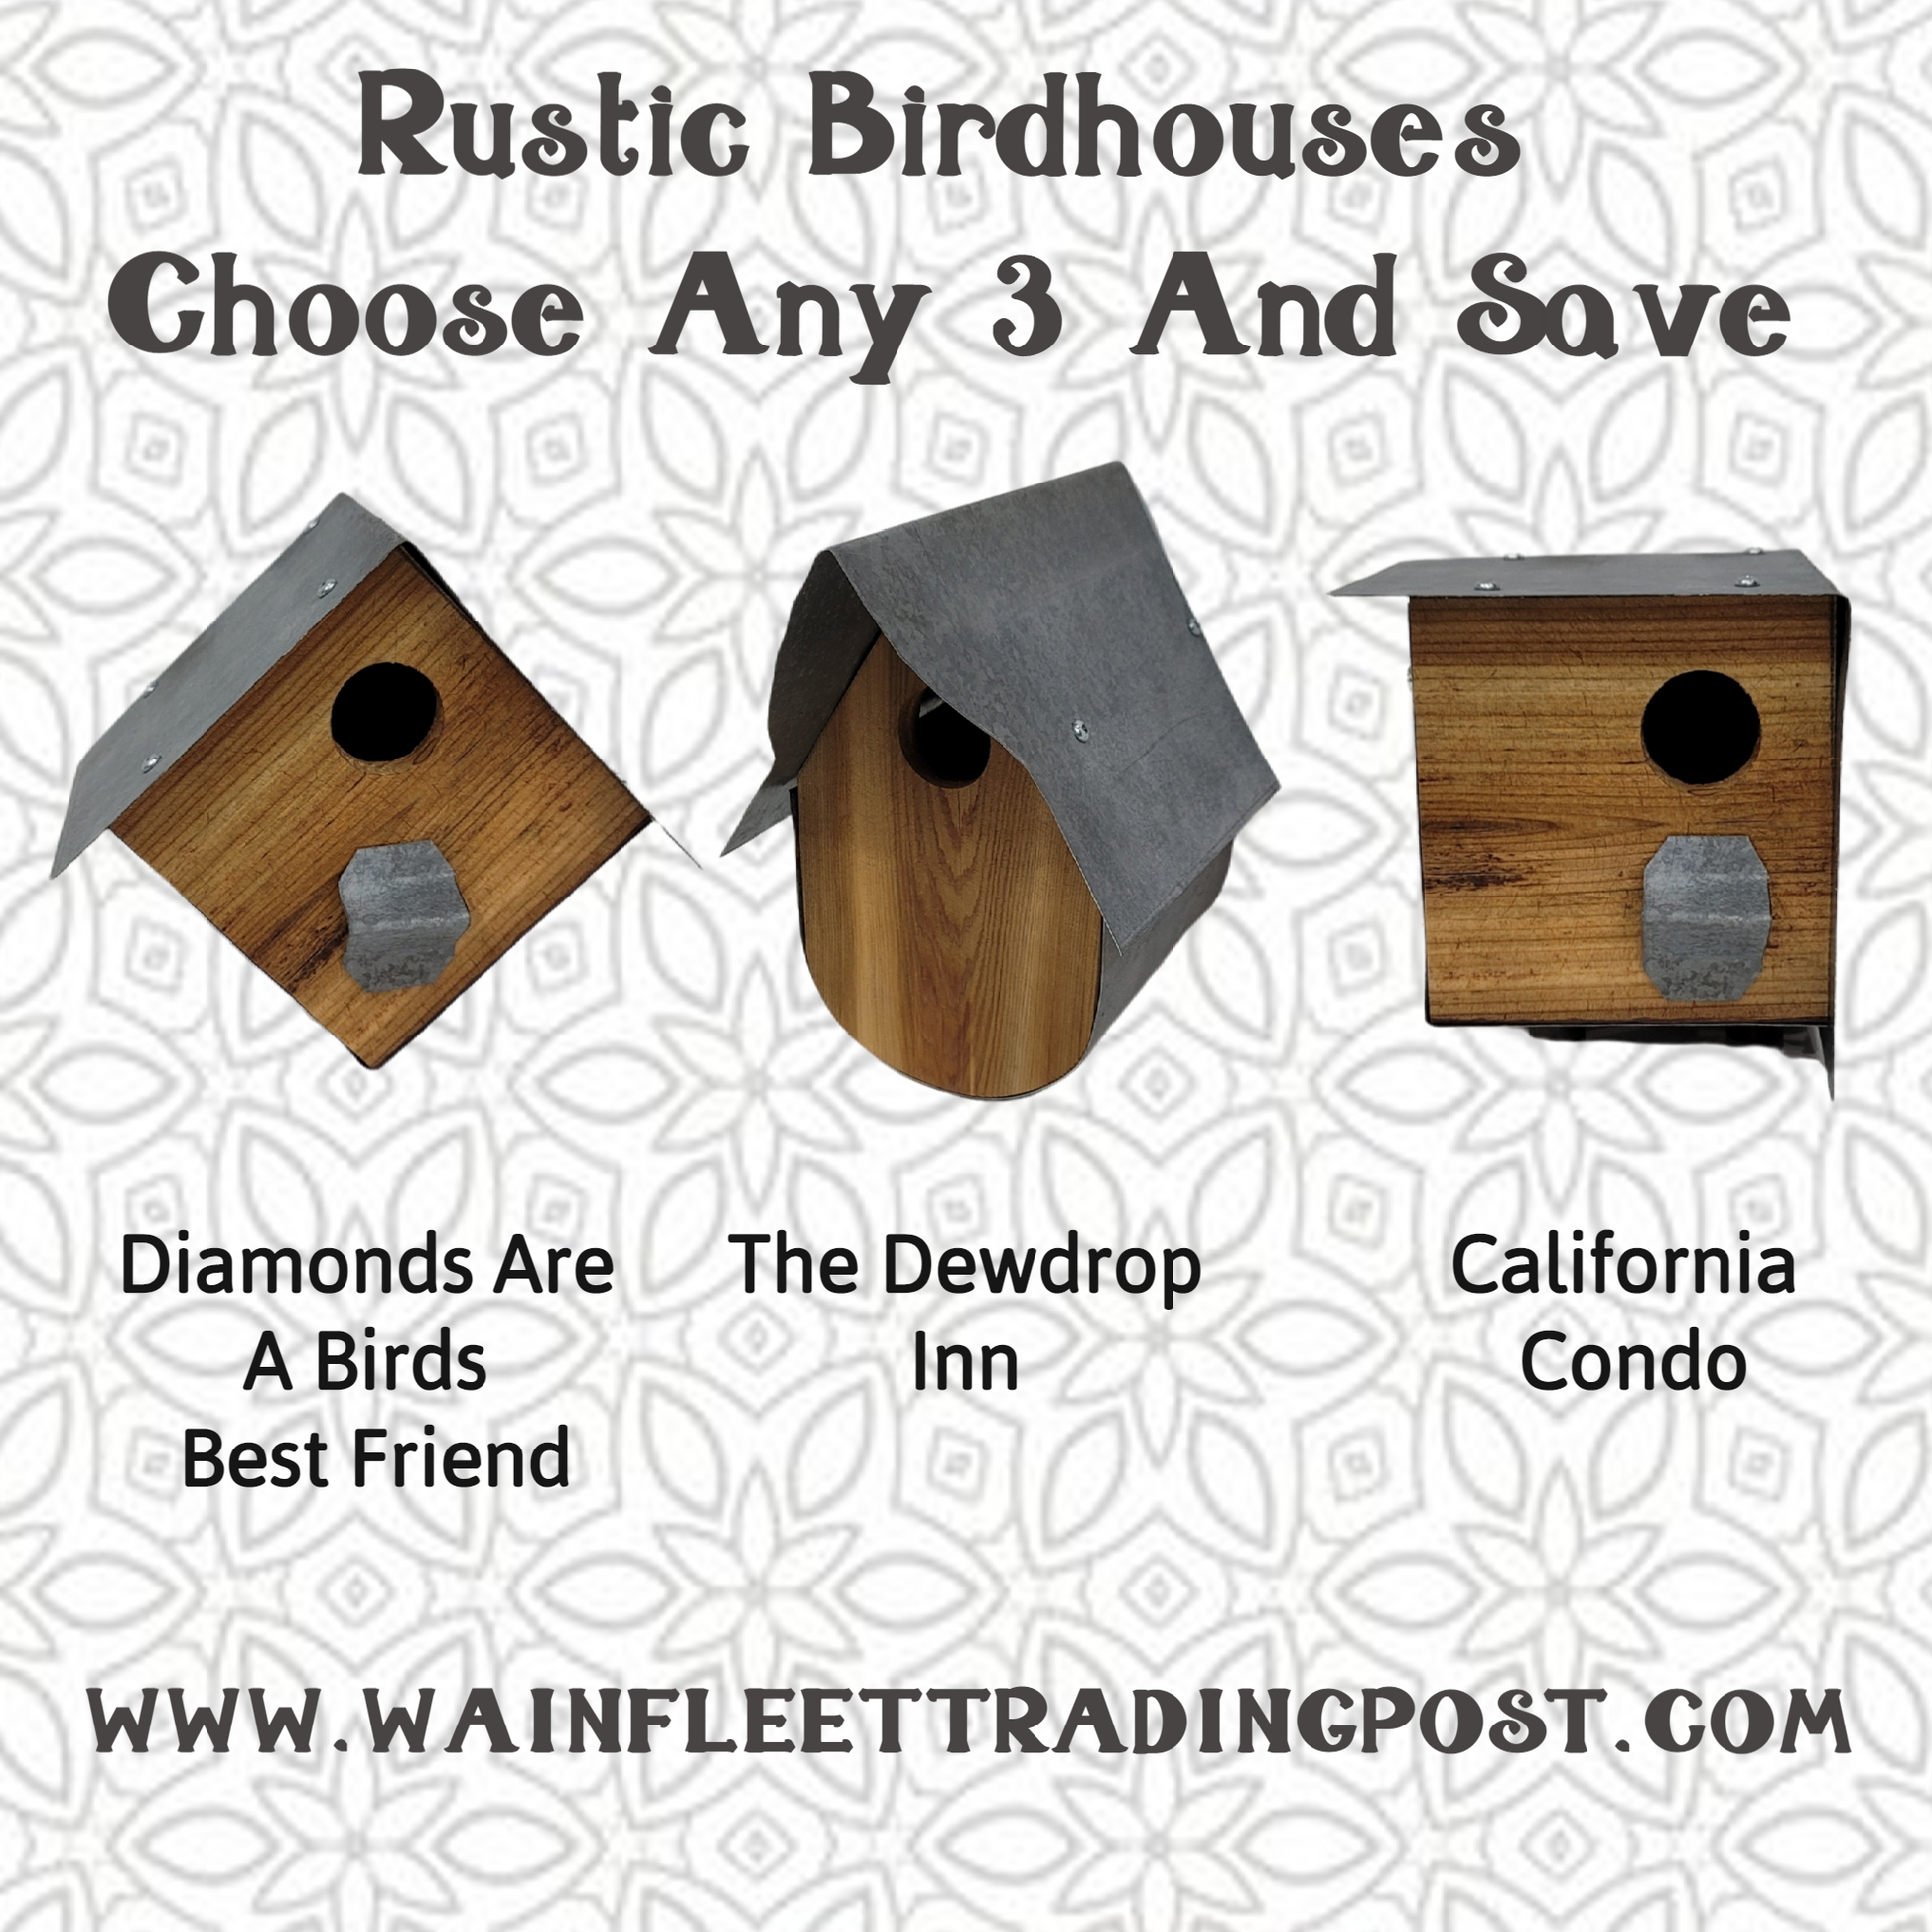 birdhouse 3 rustic styles to choose from bundle of 3